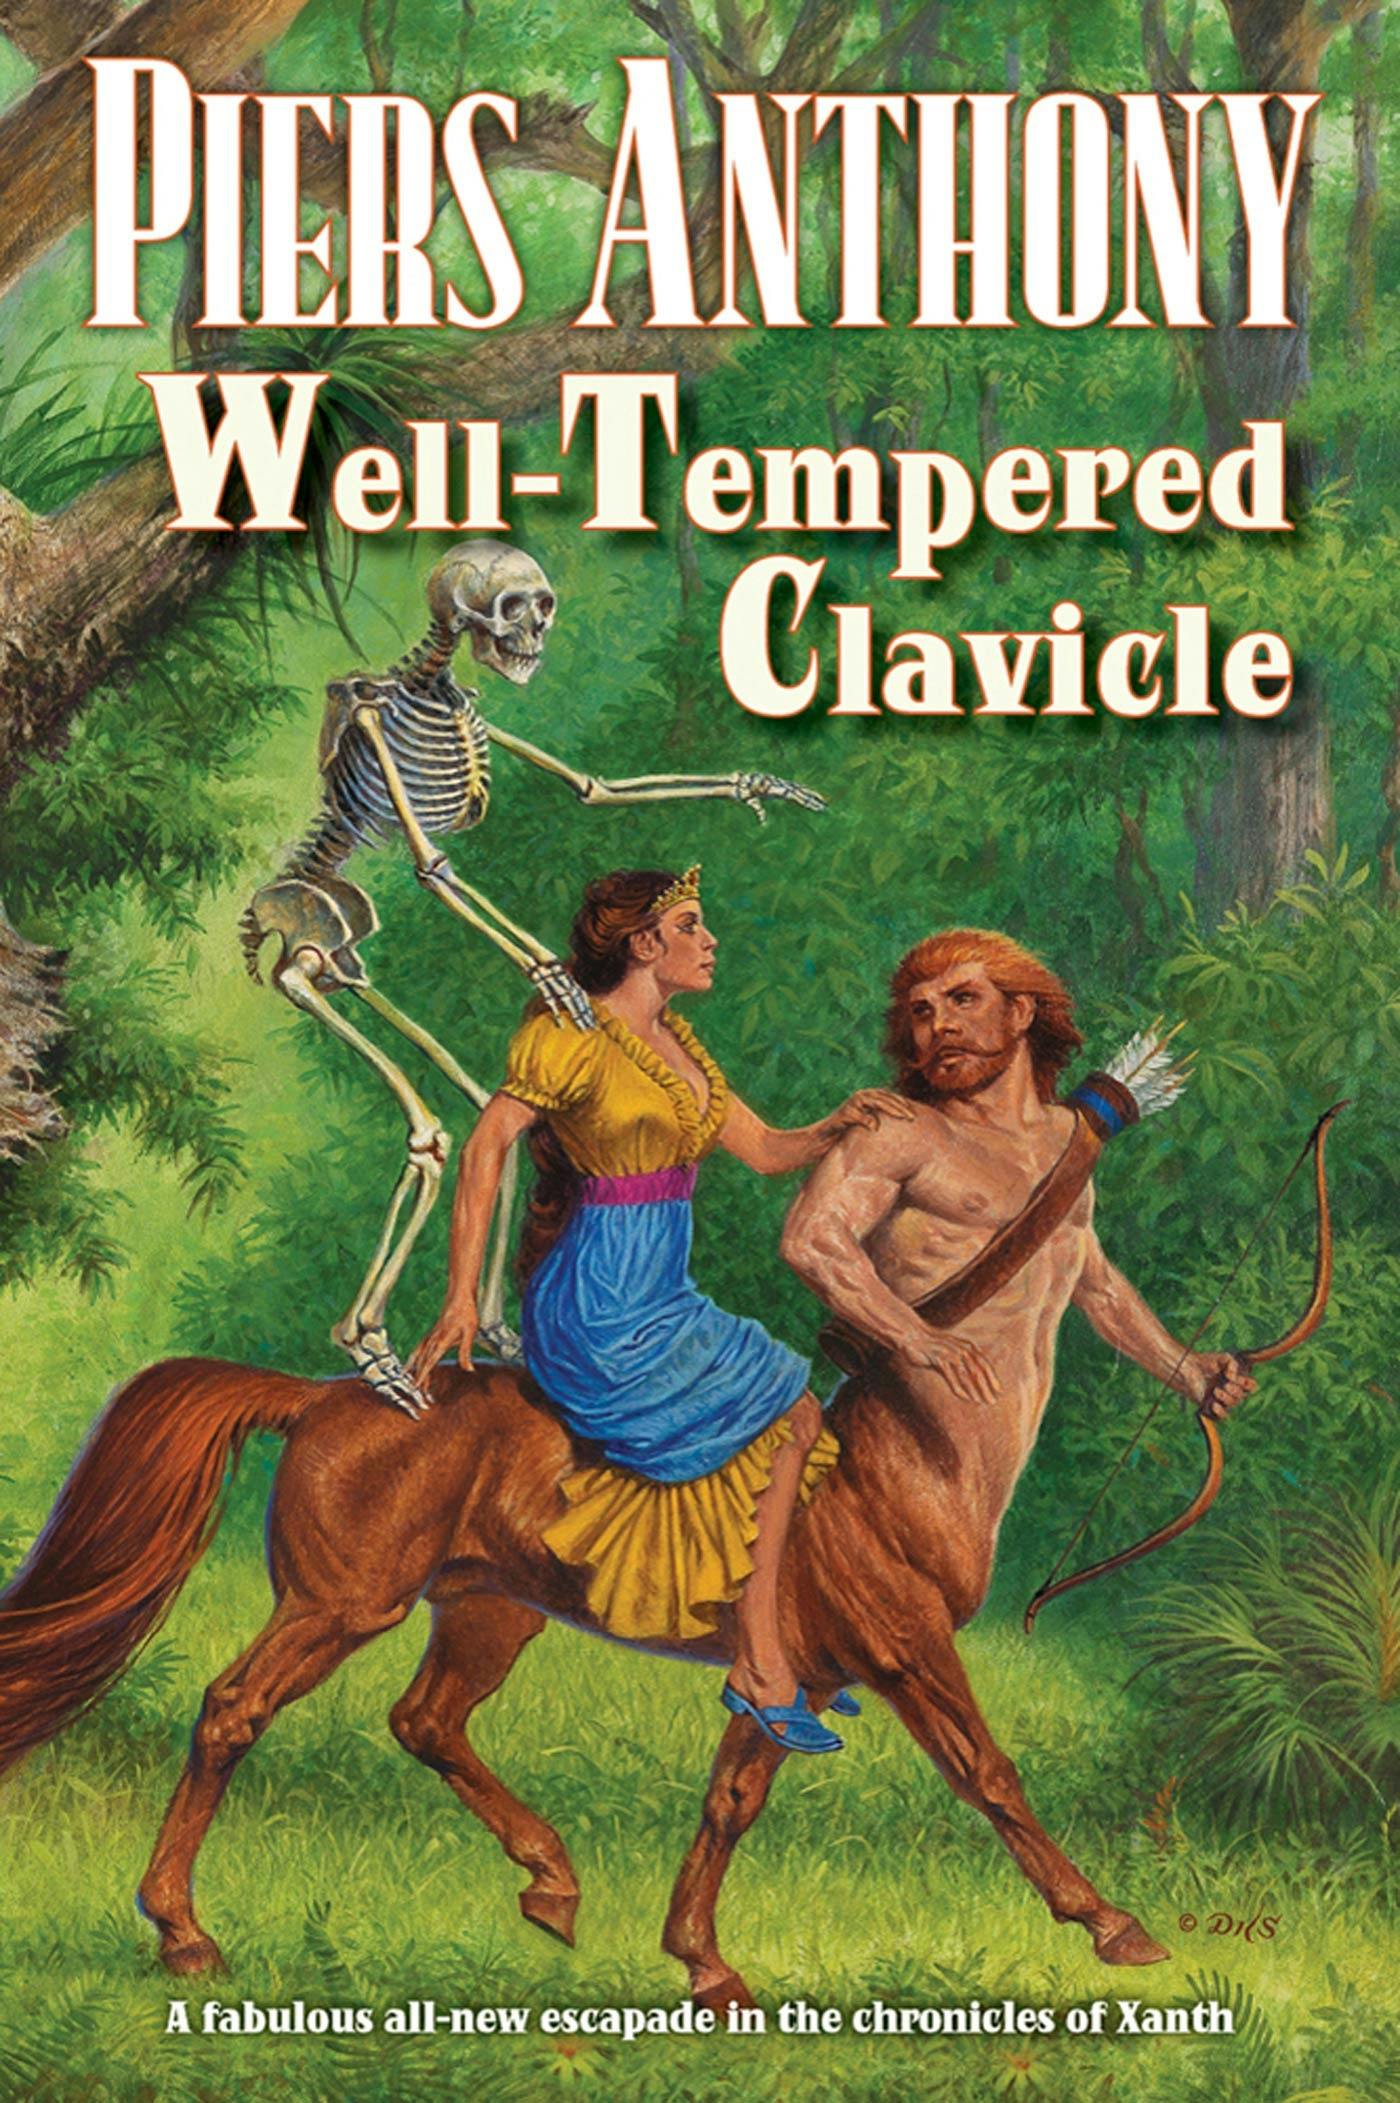 Cover for the book titled as: Well-Tempered Clavicle